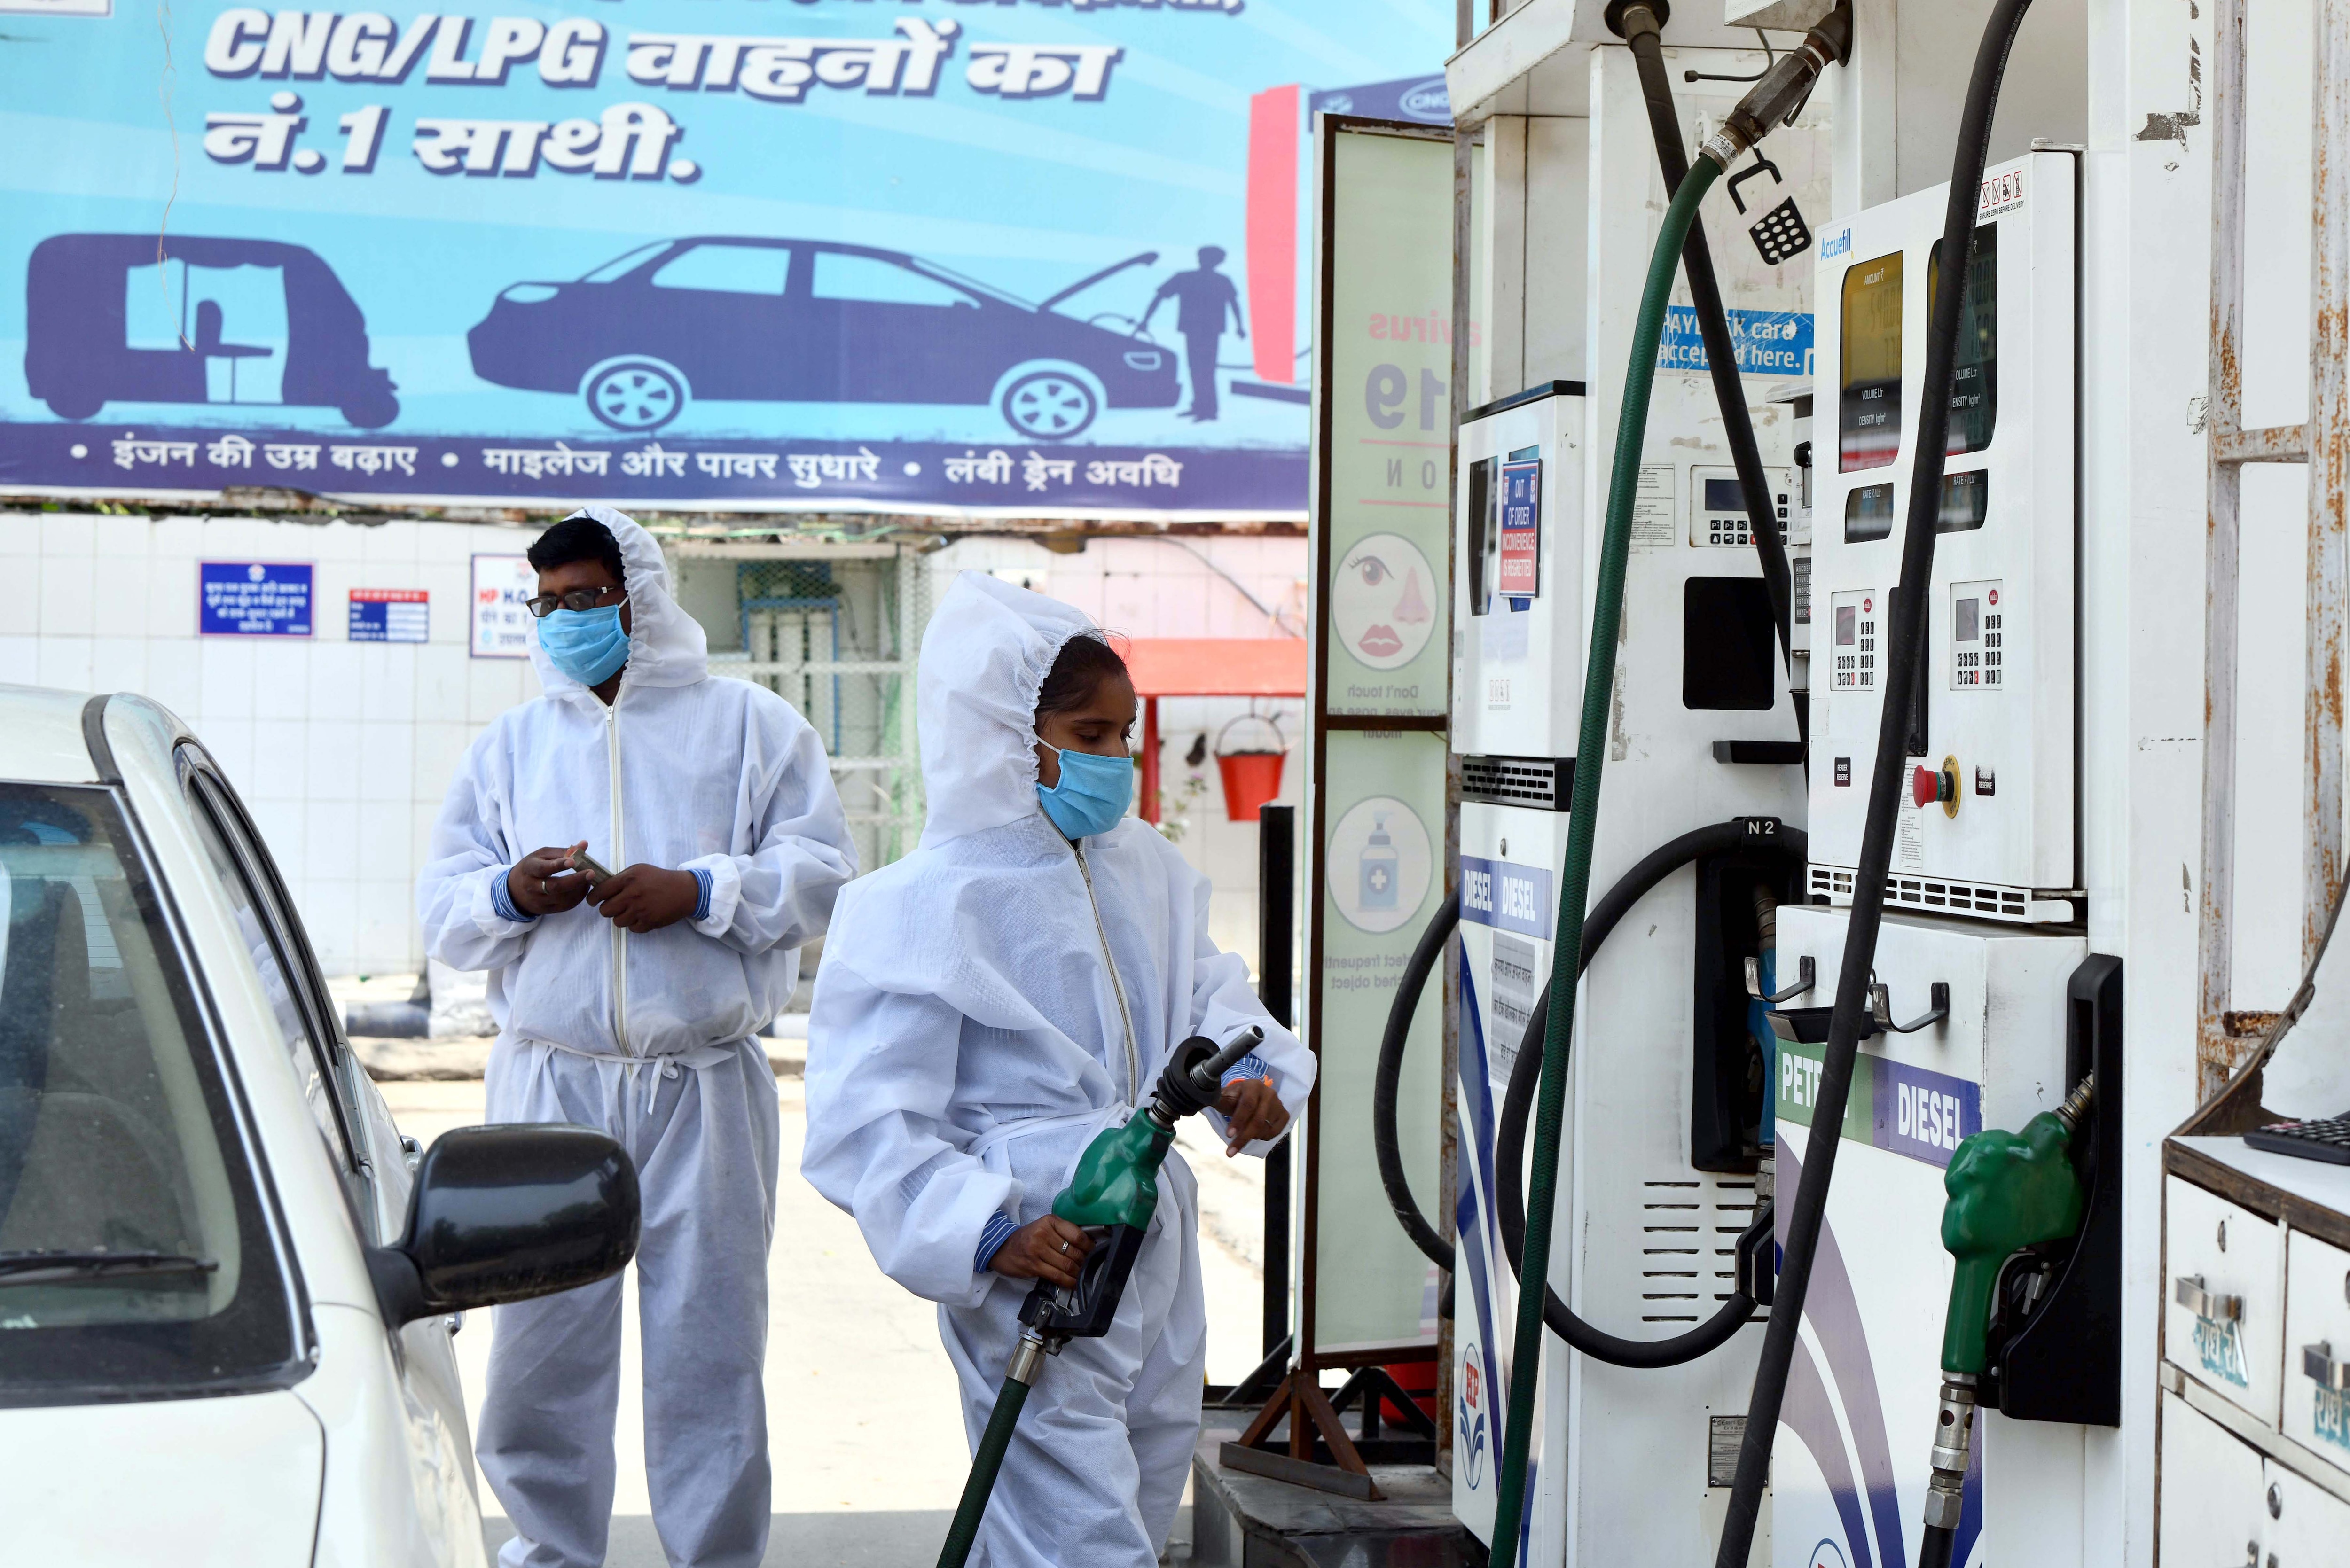 The consumption of all petroleum products put together almost doubled in May 2020 compared to April 2020. (Representational photo)